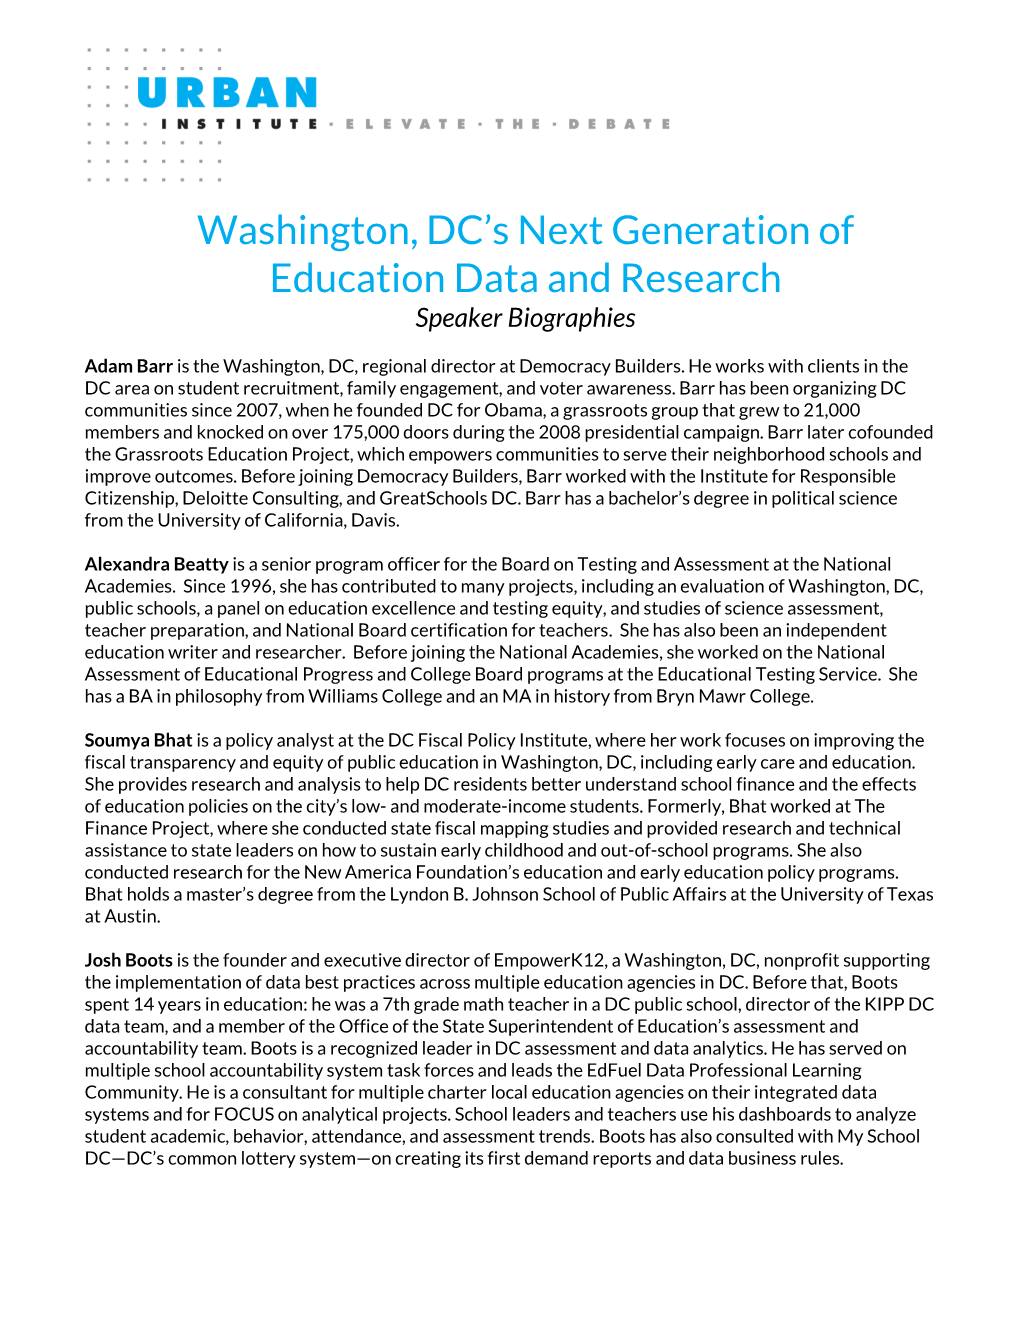 Washington, DC's Next Generation of Education Data and Research